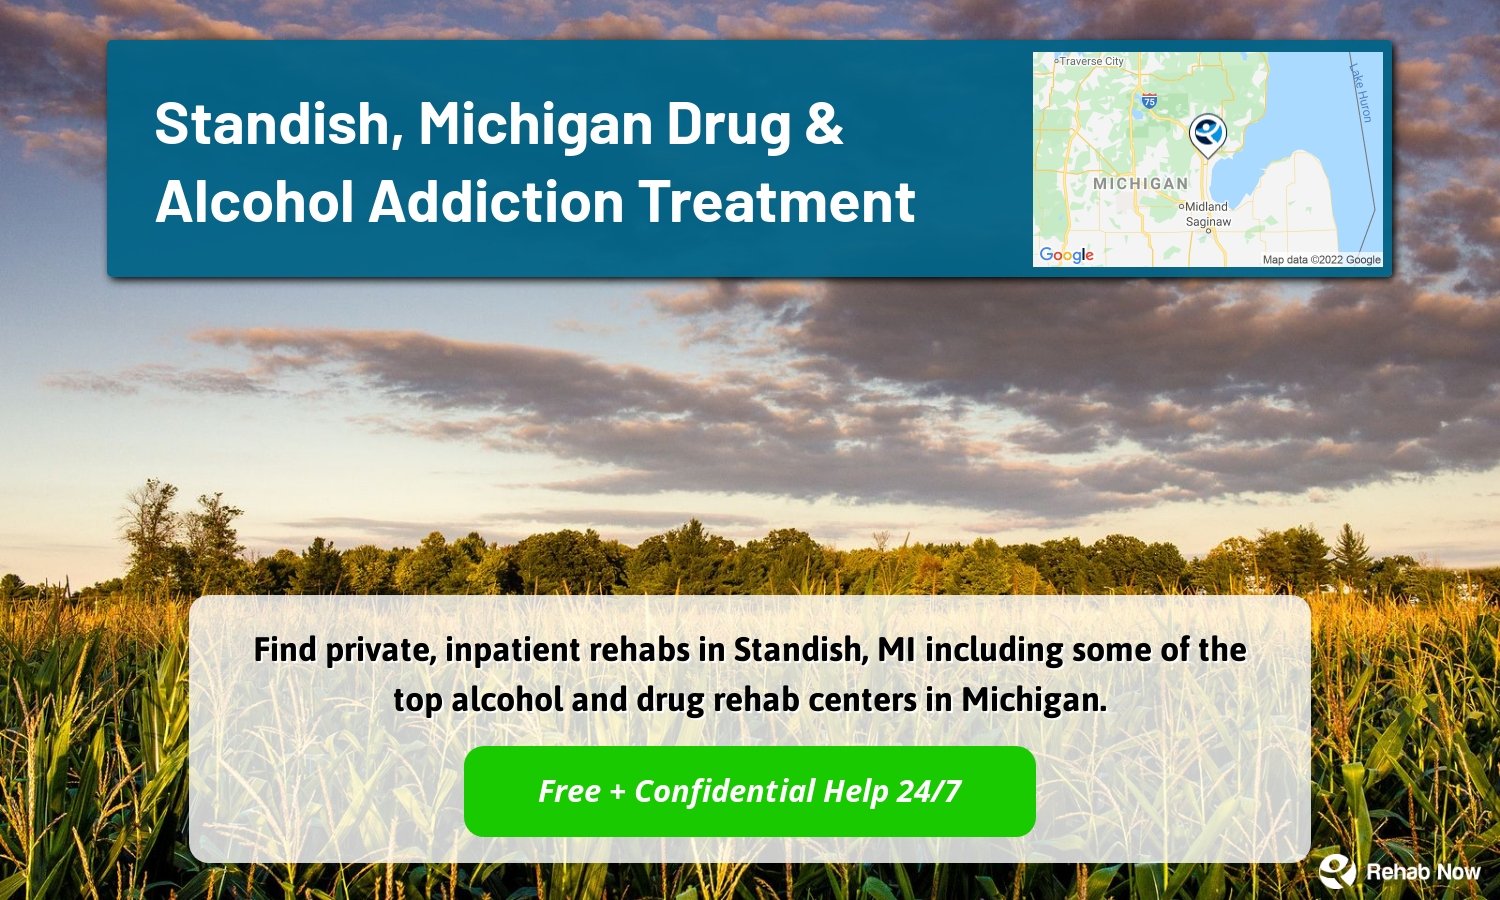 Find private, inpatient rehabs in Standish, MI including some of the top alcohol and drug rehab centers in Michigan.